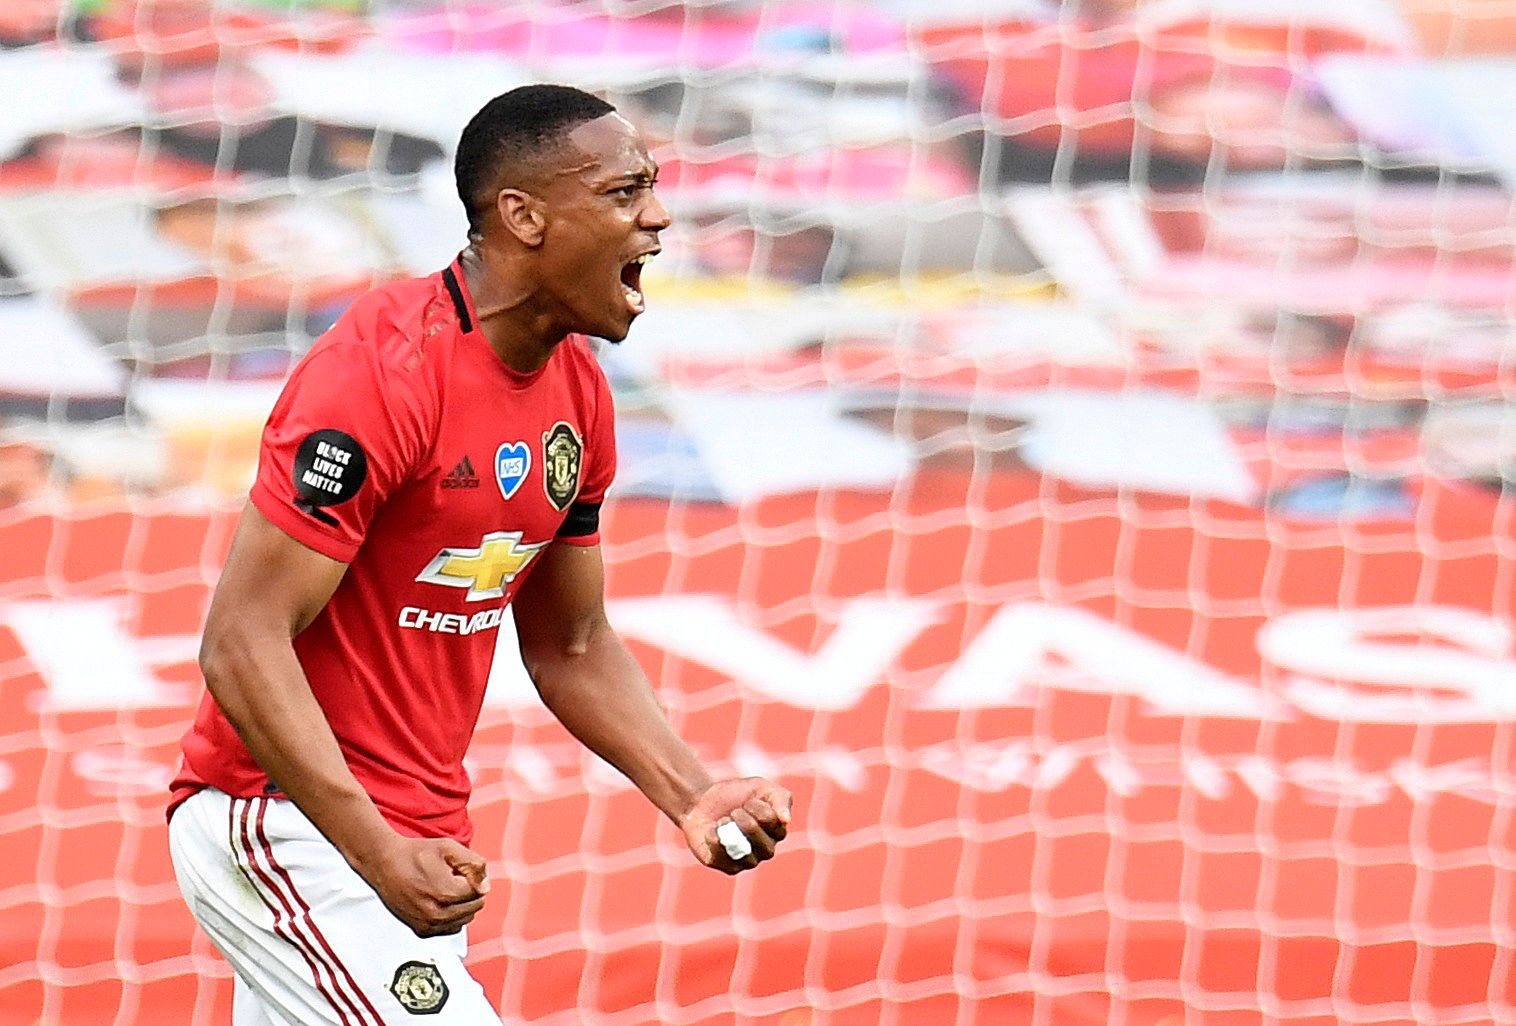 Soccer Football - Premier League - Manchester United v Southampton - Old Trafford, Manchester, Britain - July 13, 2020 Manchester United's  Anthony Martial celebrates scoring their second goal, as play resumes behind closed doors following the outbreak of the coronavirus disease (COVID-19) Pool via REUTERS/Peter Powell EDITORIAL USE ONLY. No use with unauthorized audio, video, data, fixture lists, club/league logos or 'live' services. Online in-match use limited to 75 images, no video emulation.